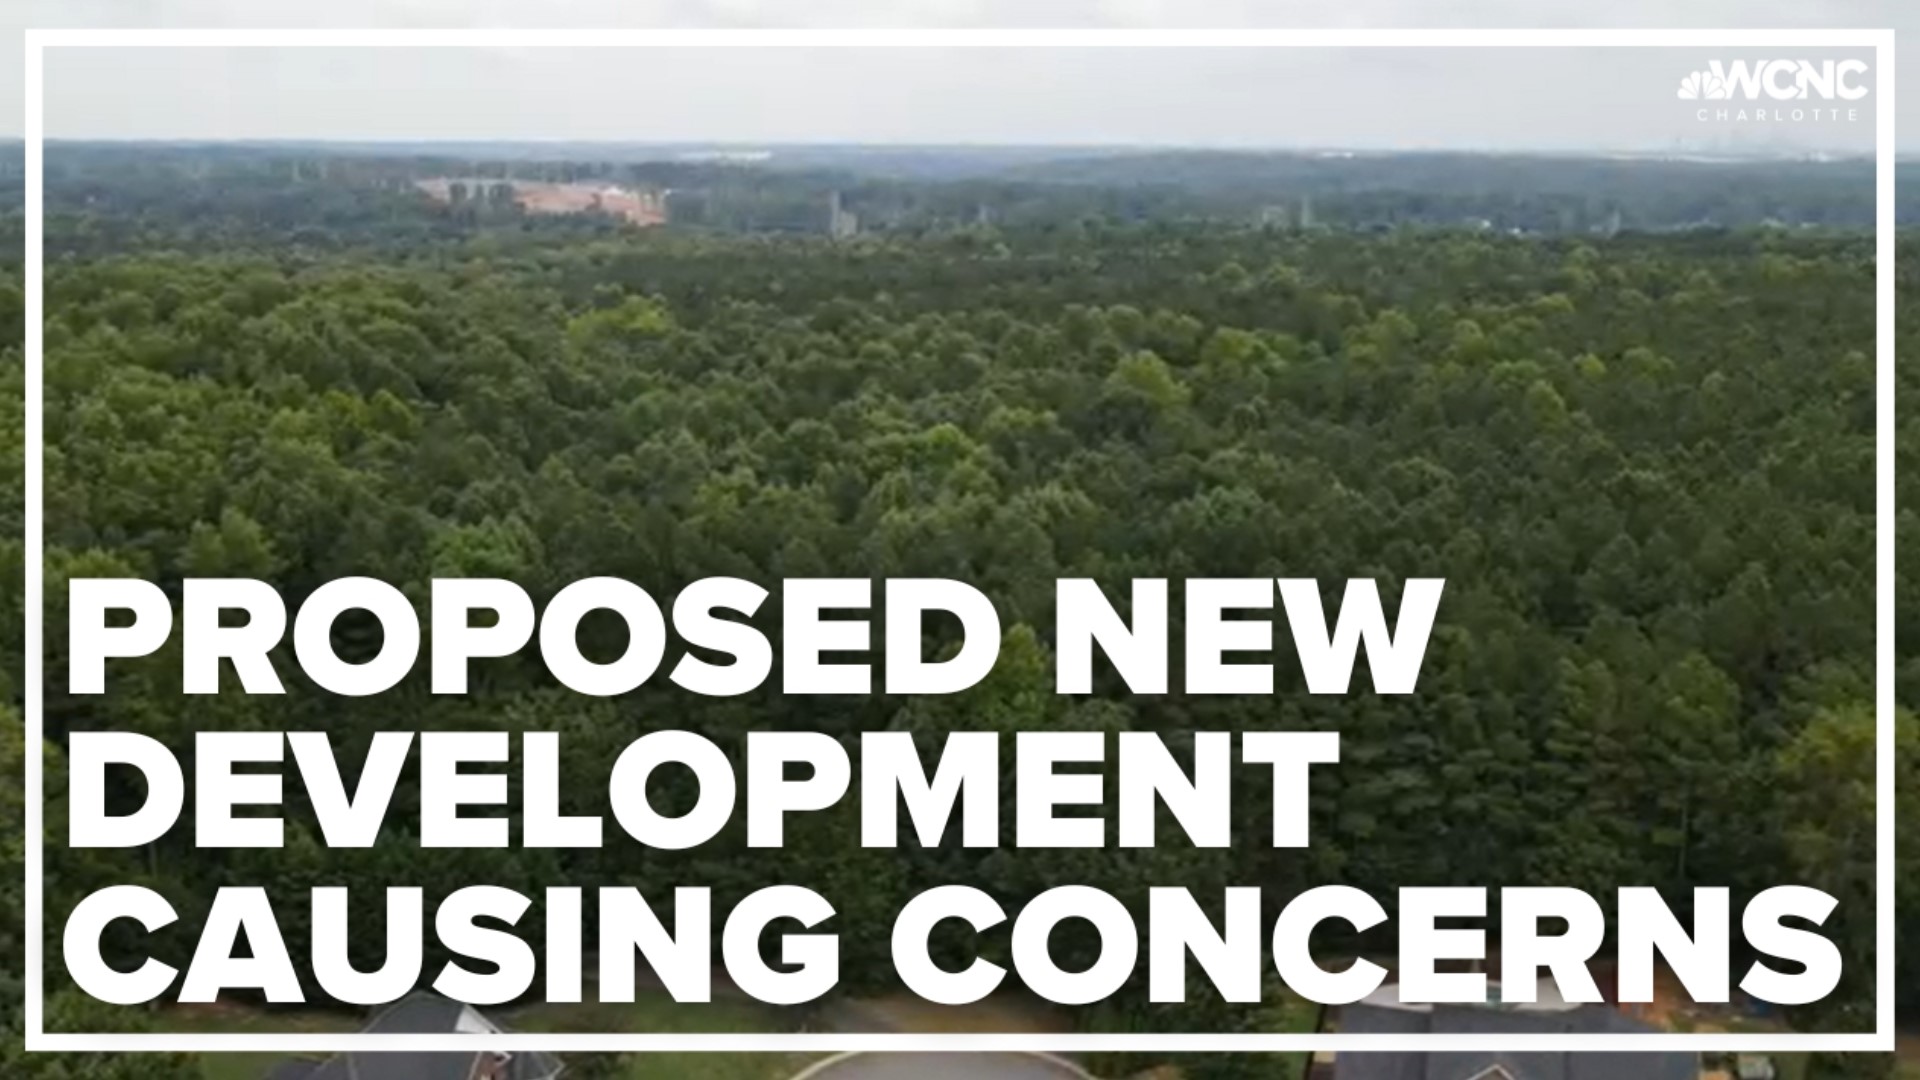 The proposed plan would include about 630 new single-family homes built on 275 acres of vacant land.